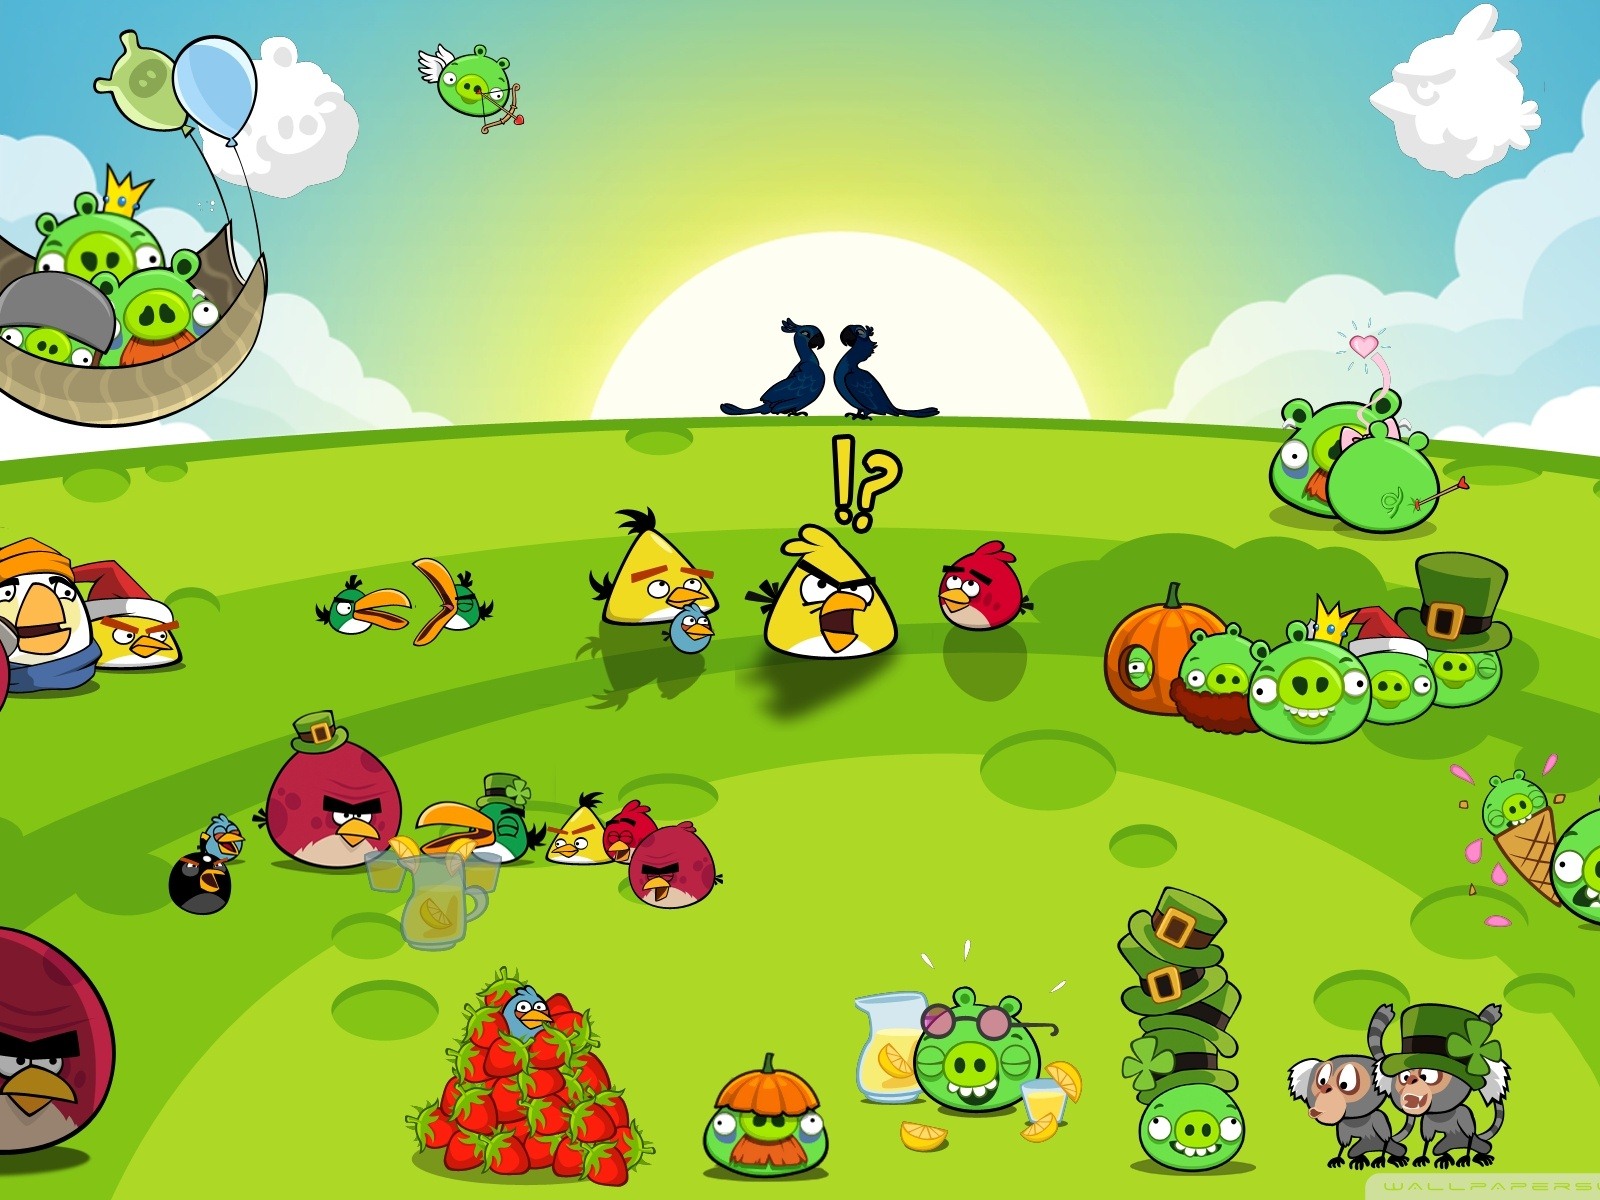 Angry Birds Game Wallpapers #11 - 1600x1200